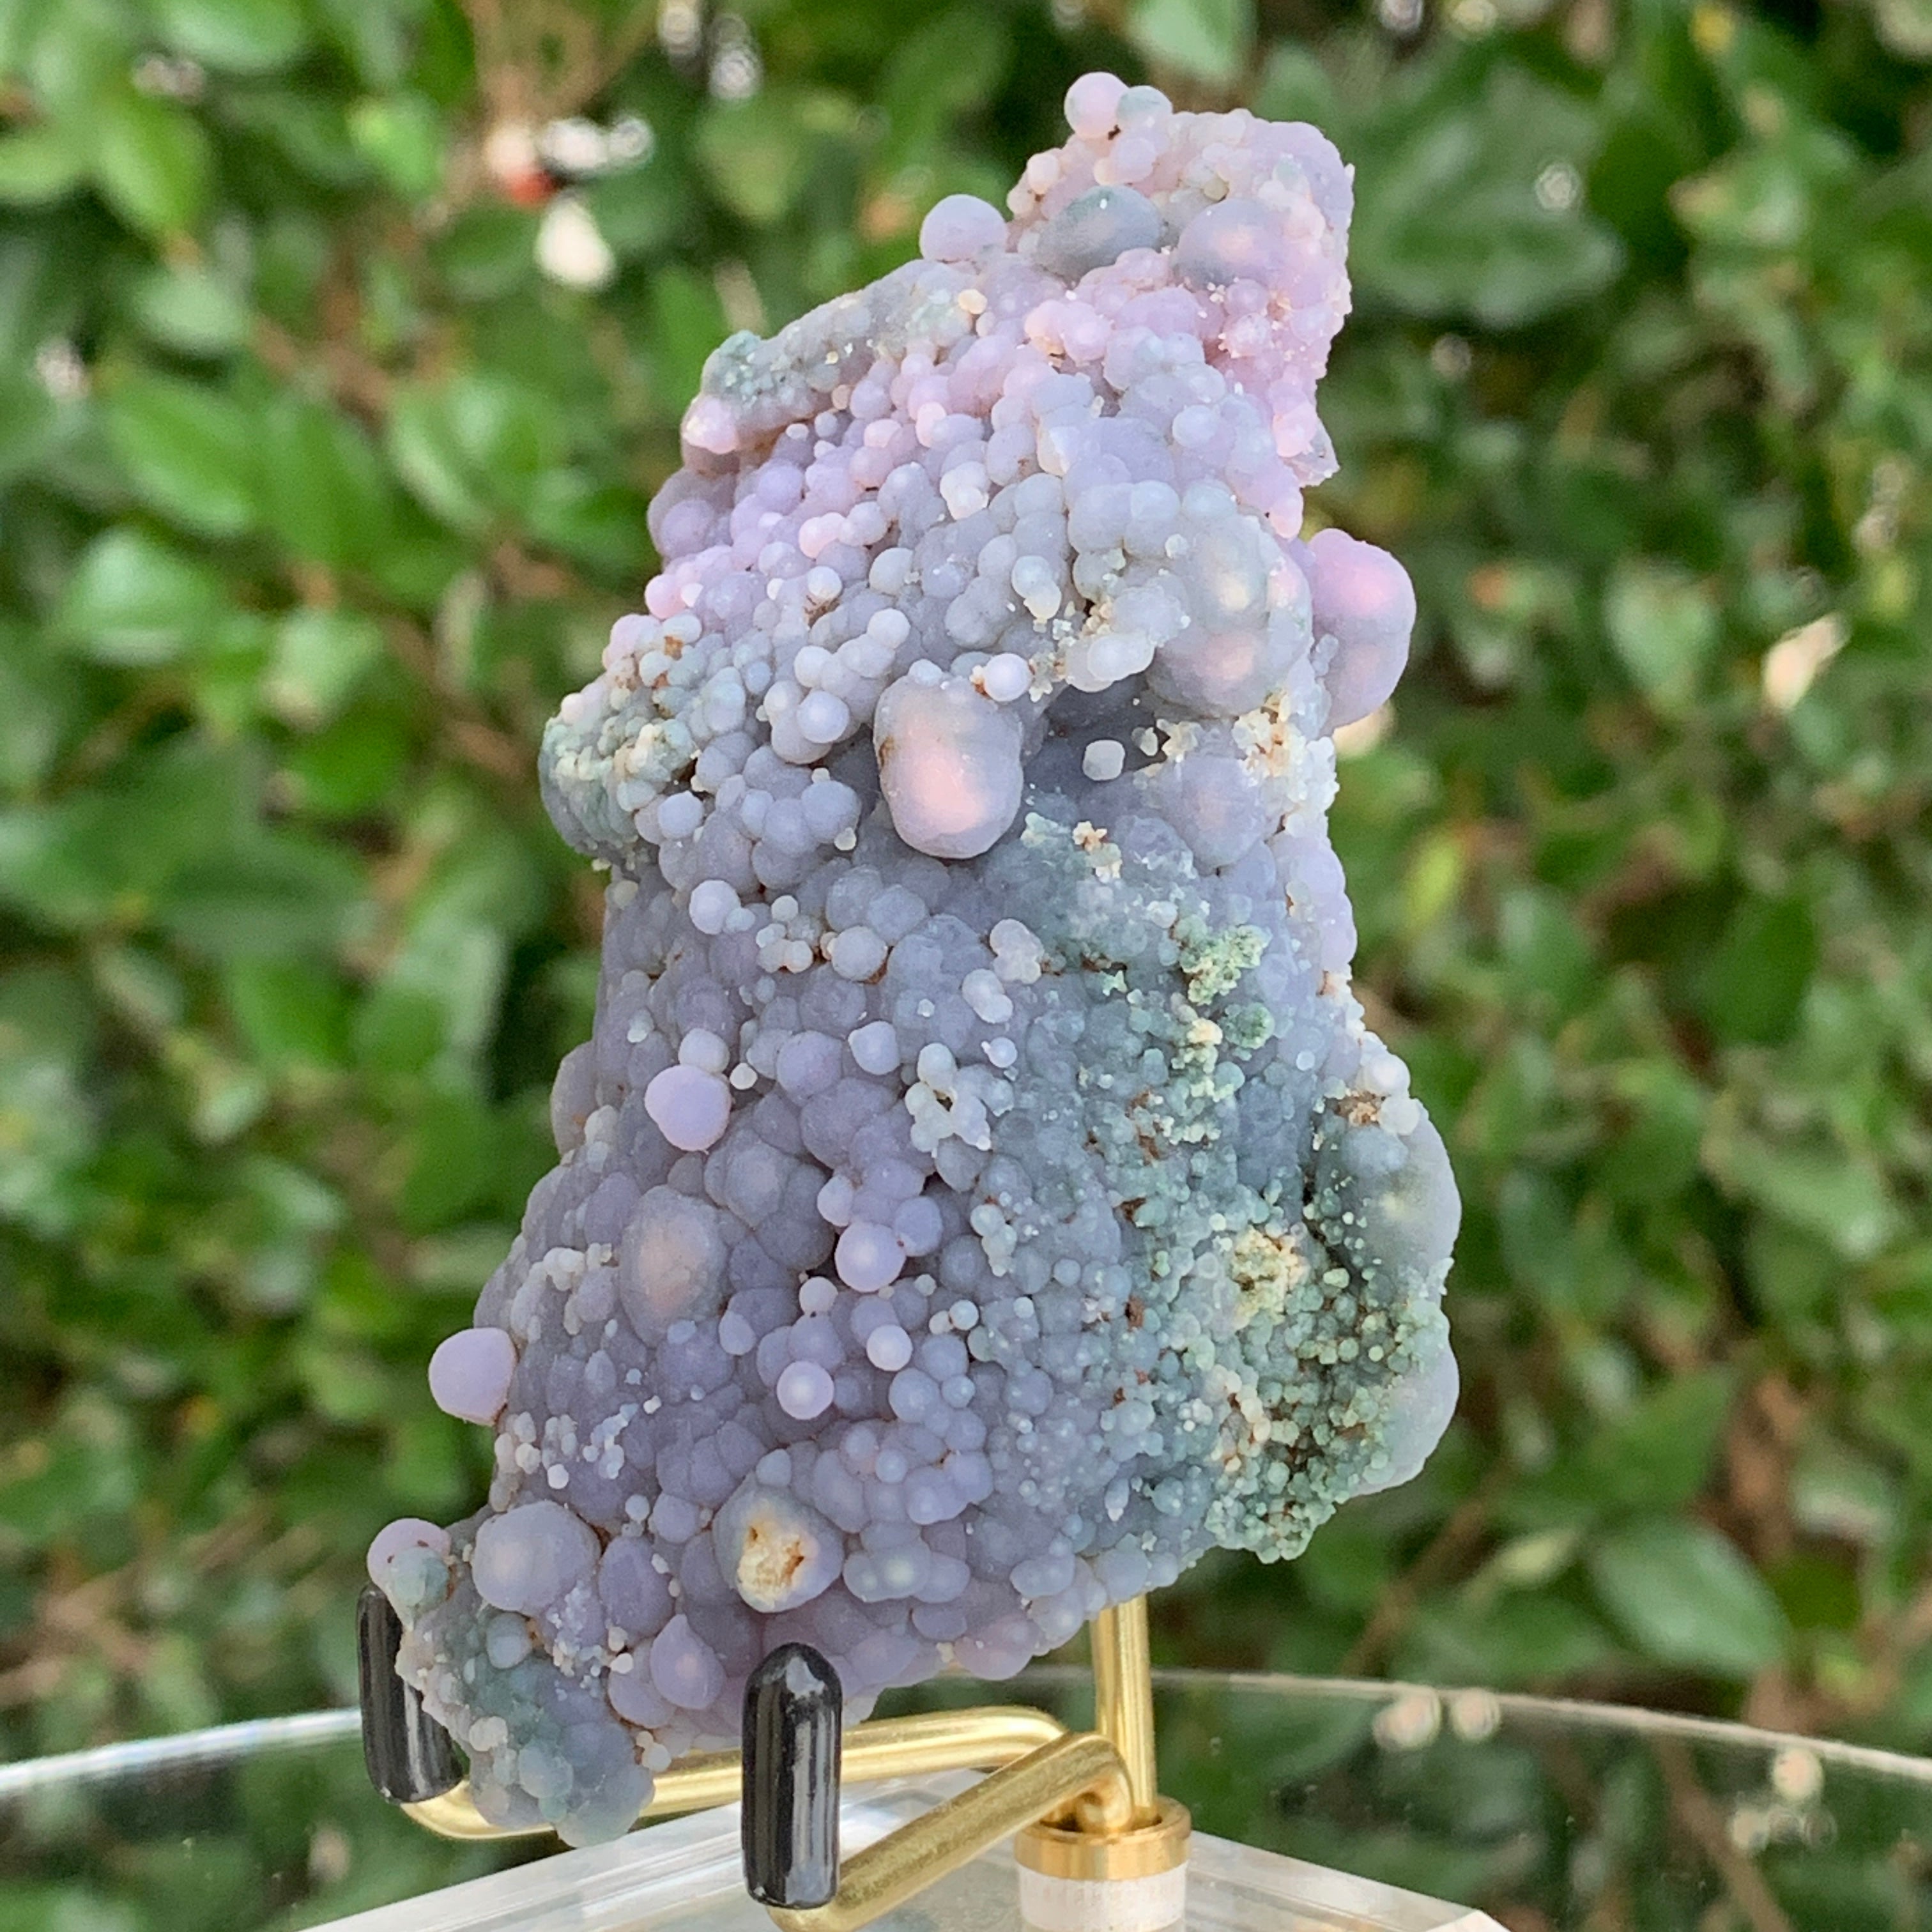 166g 5x4x3cm Purple Grape Agate Chalcedony from Indonesia